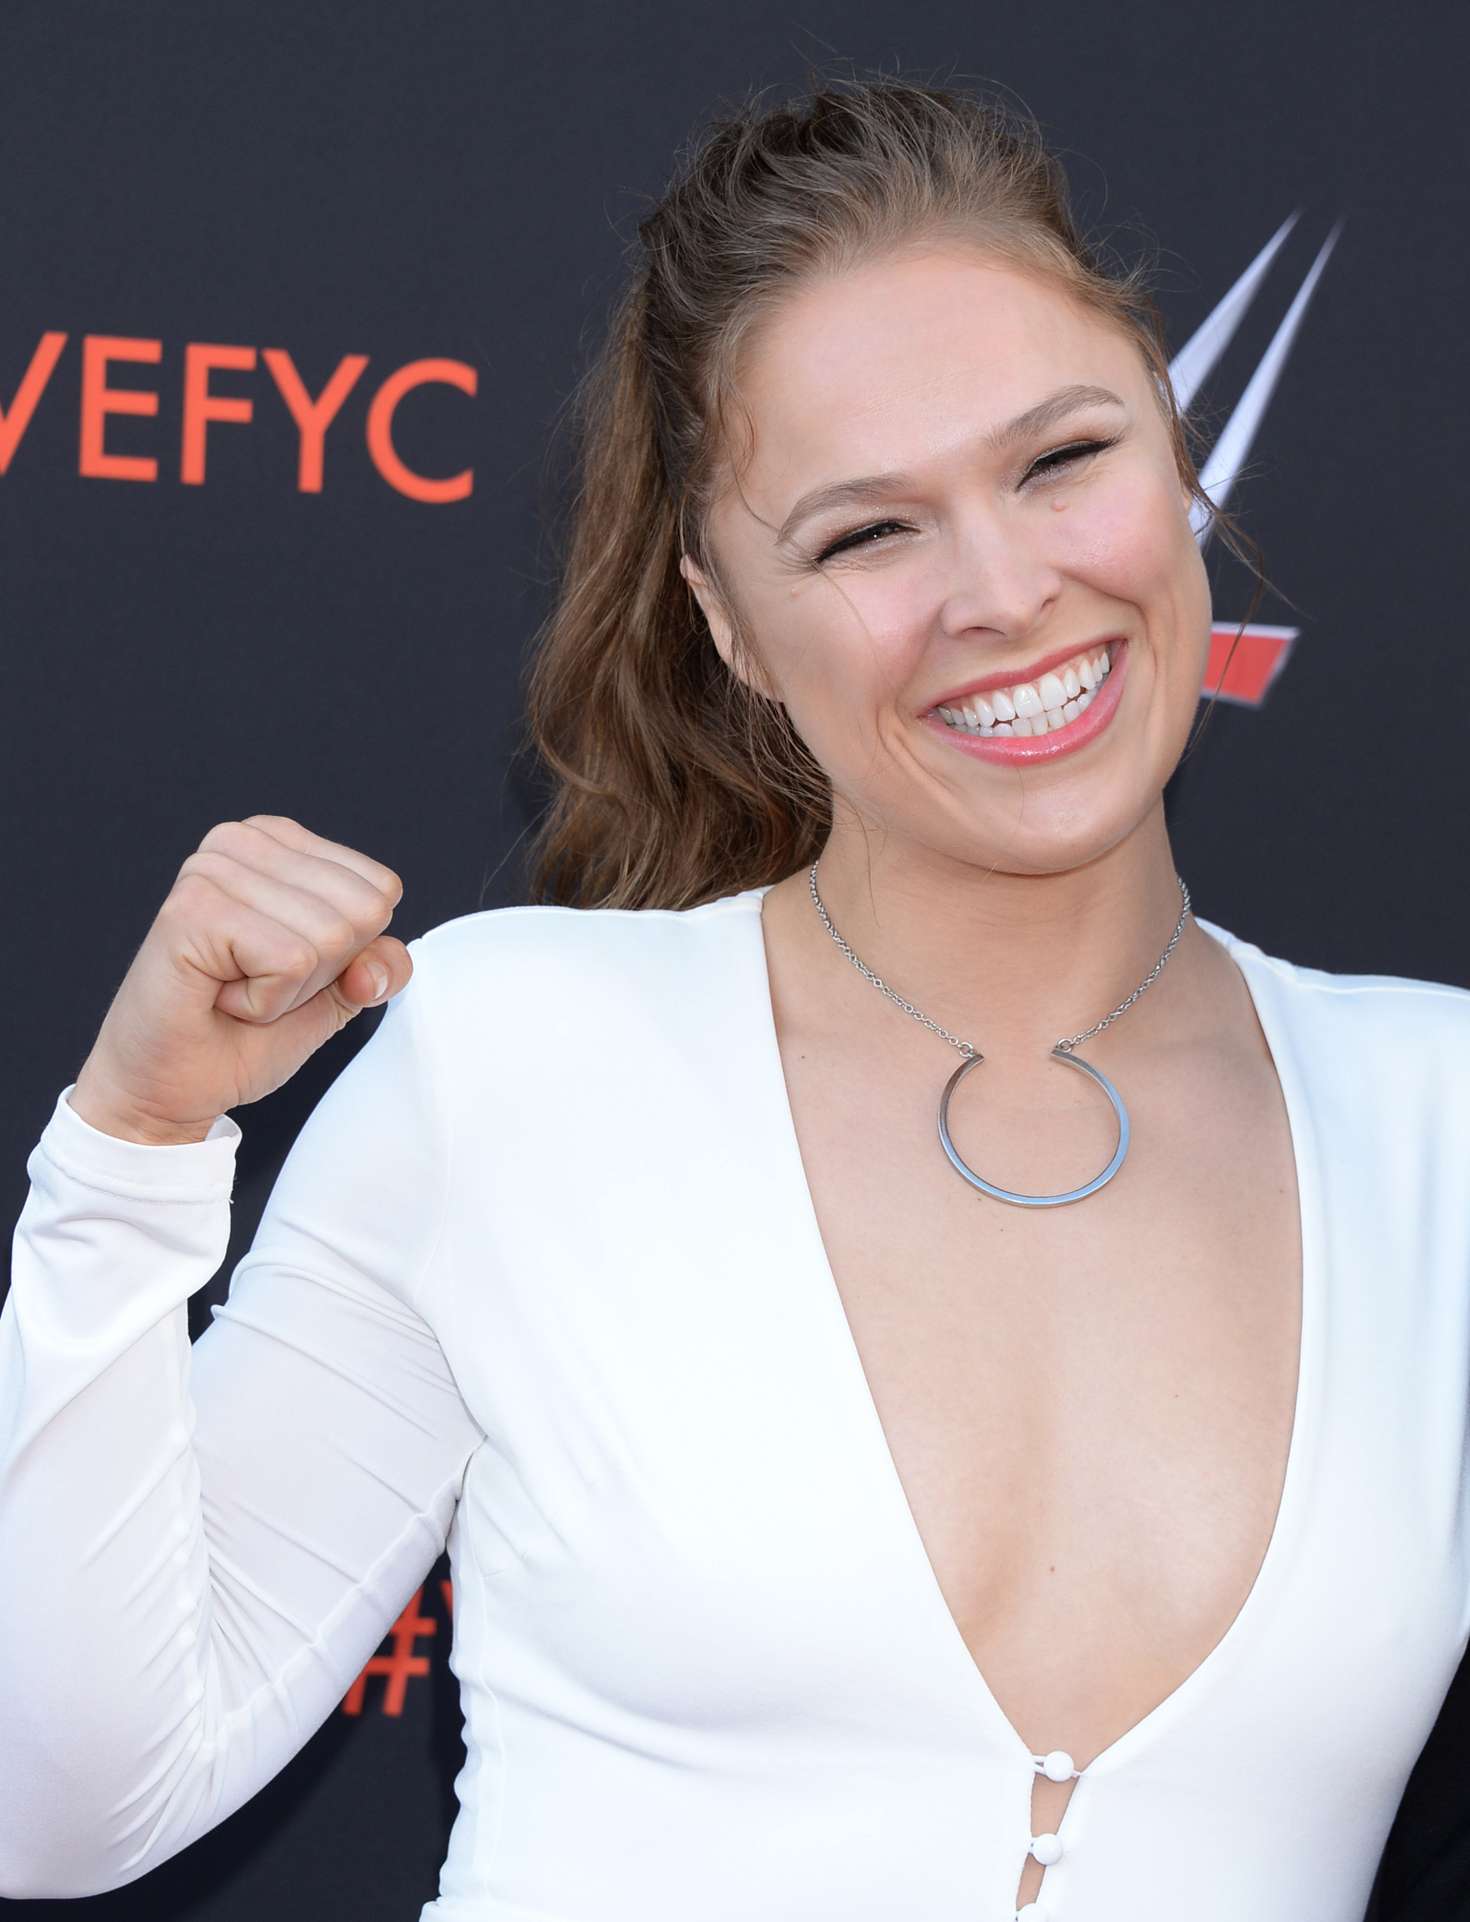 Ronda Rousey â€“ WWE FYC Event in Los Angeles